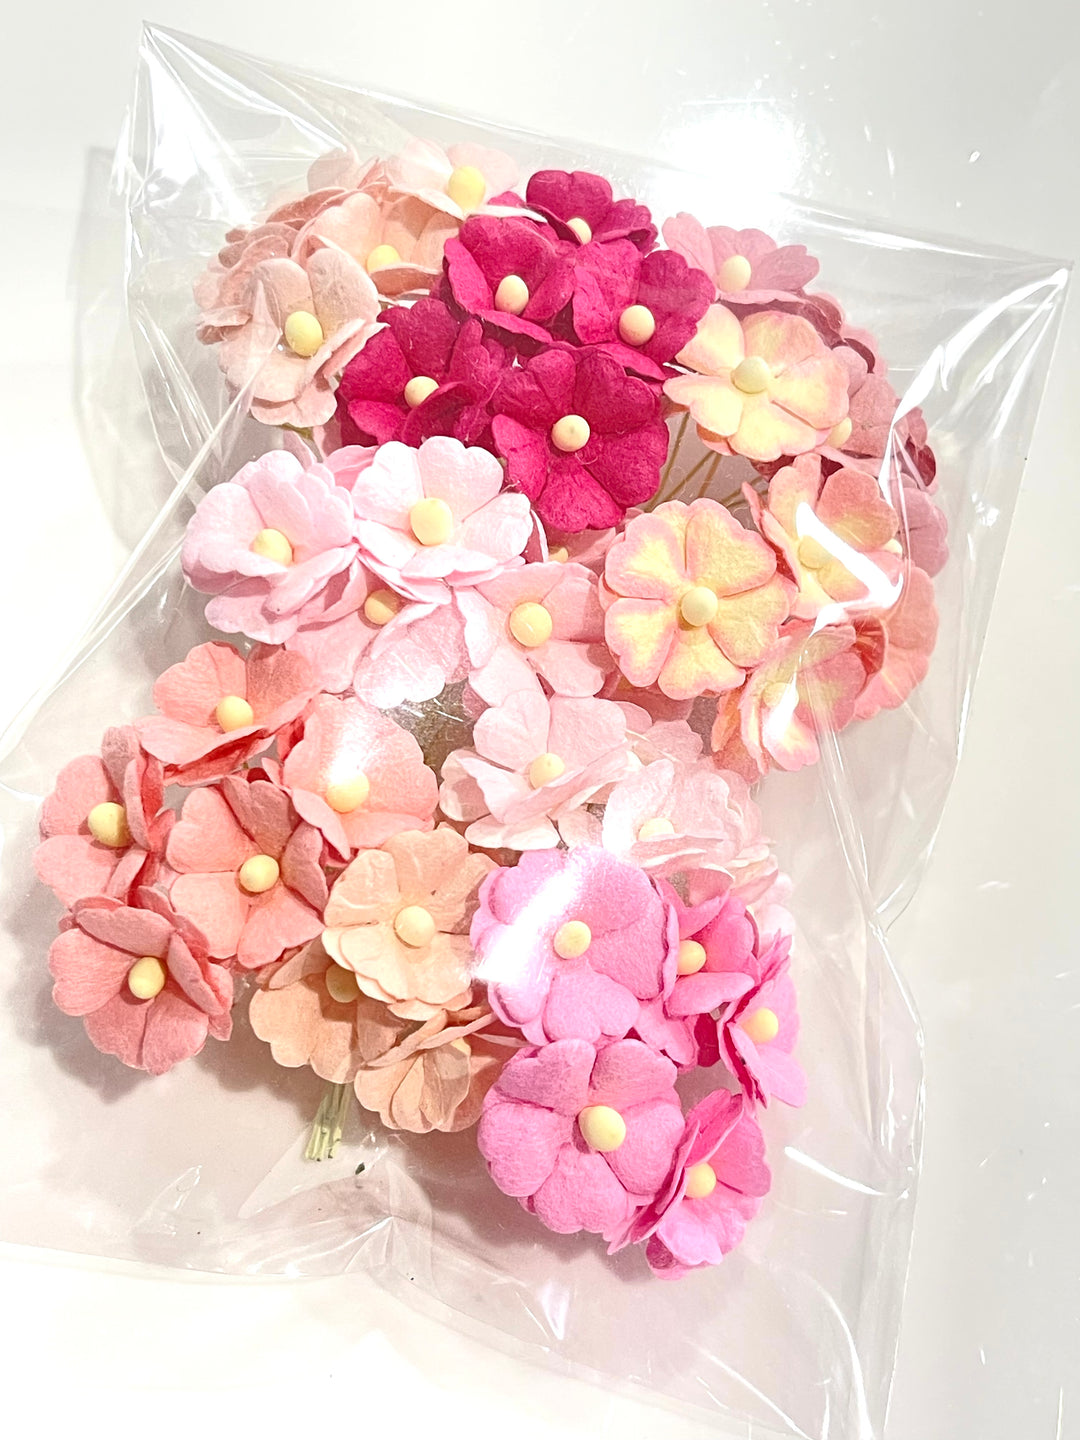 PREORDER Bulk 50 Large Sweetheart Blossoms Mulberry Paper Flowers - 10 Mixed Pinks